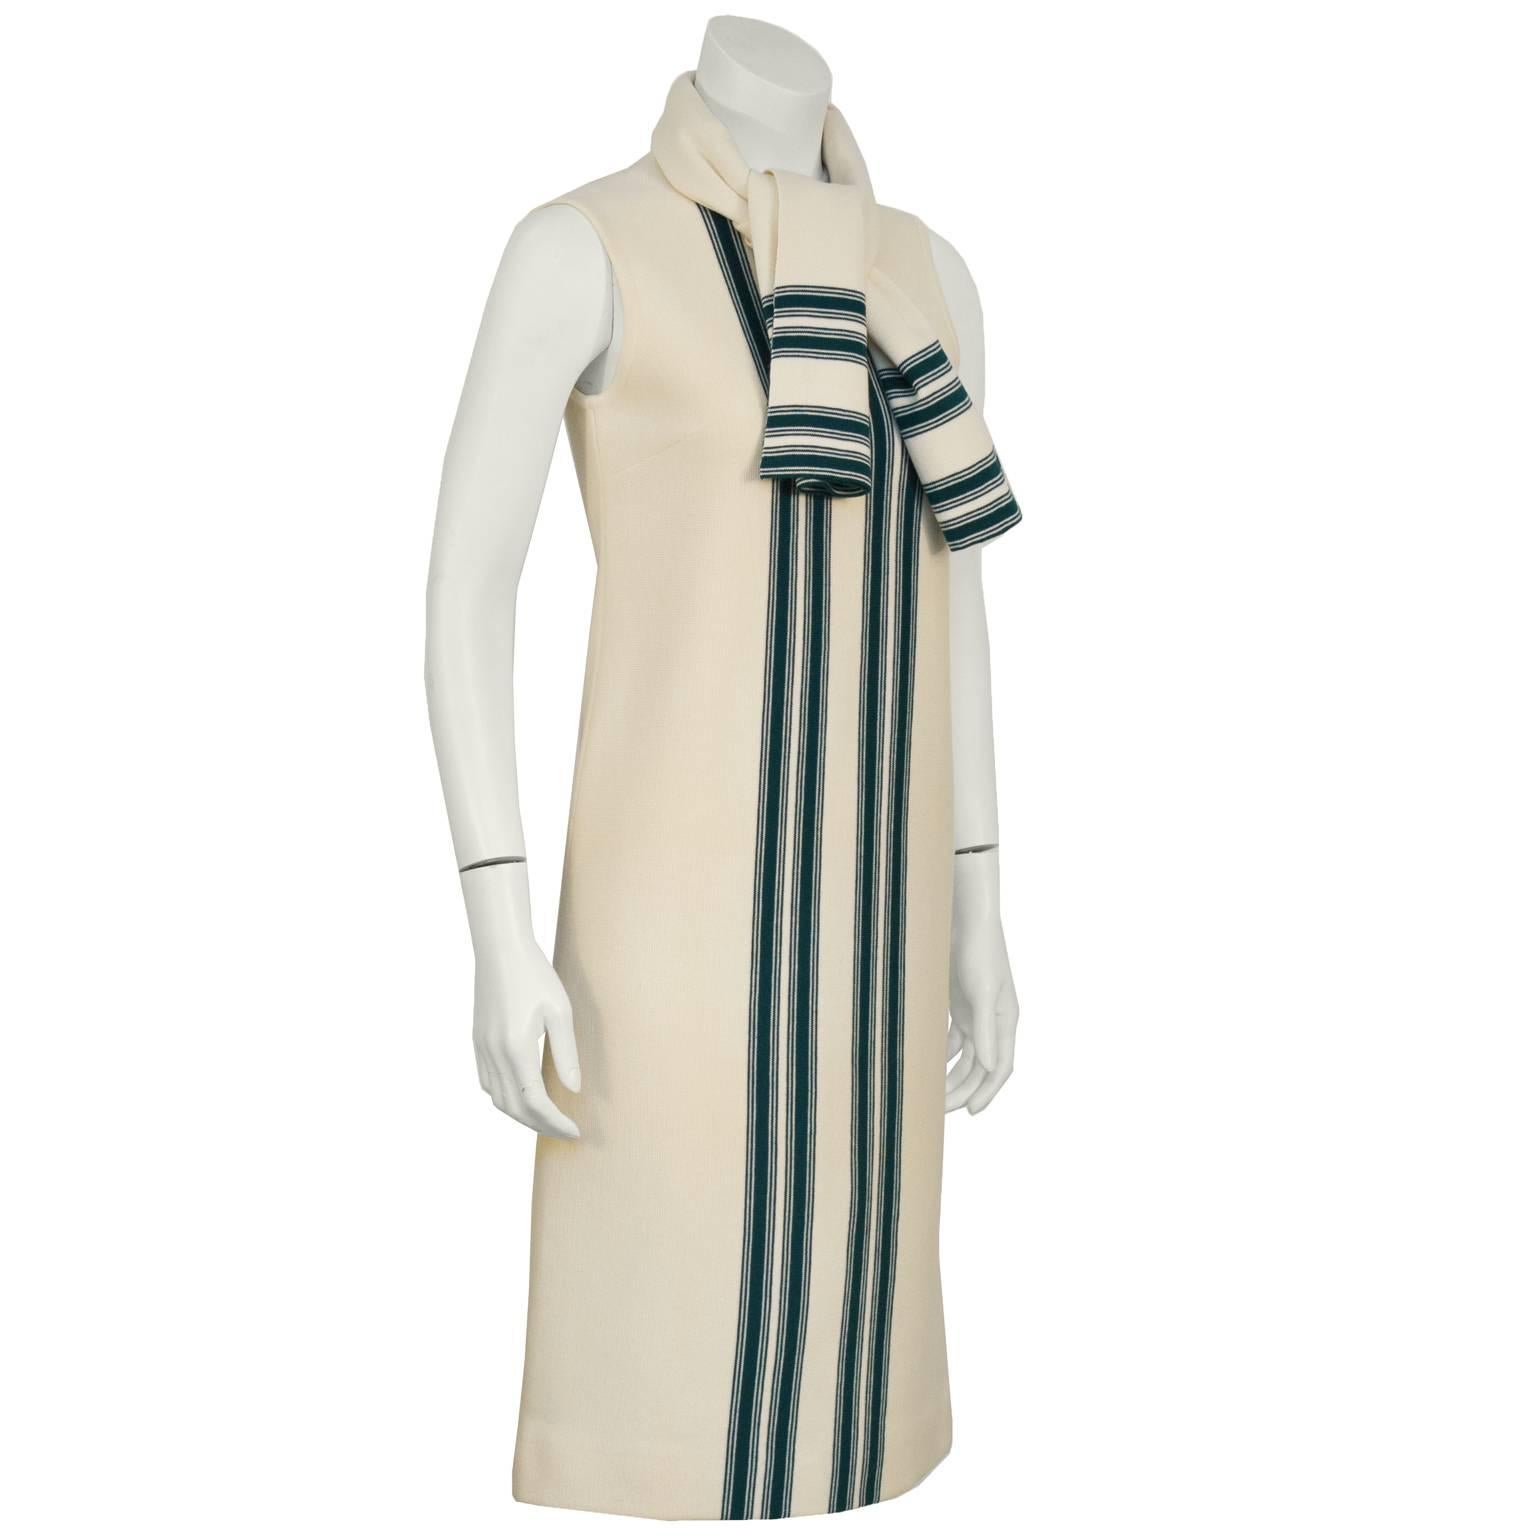 Italian 100% wool knit sleeveless dress from the 1960's. The cream dress features a vertical green stripe pattern down the front, darts at the bust, and zips up the back. Comes with a matching  scarf. In excellent condition. Fits like a 4-6. In new